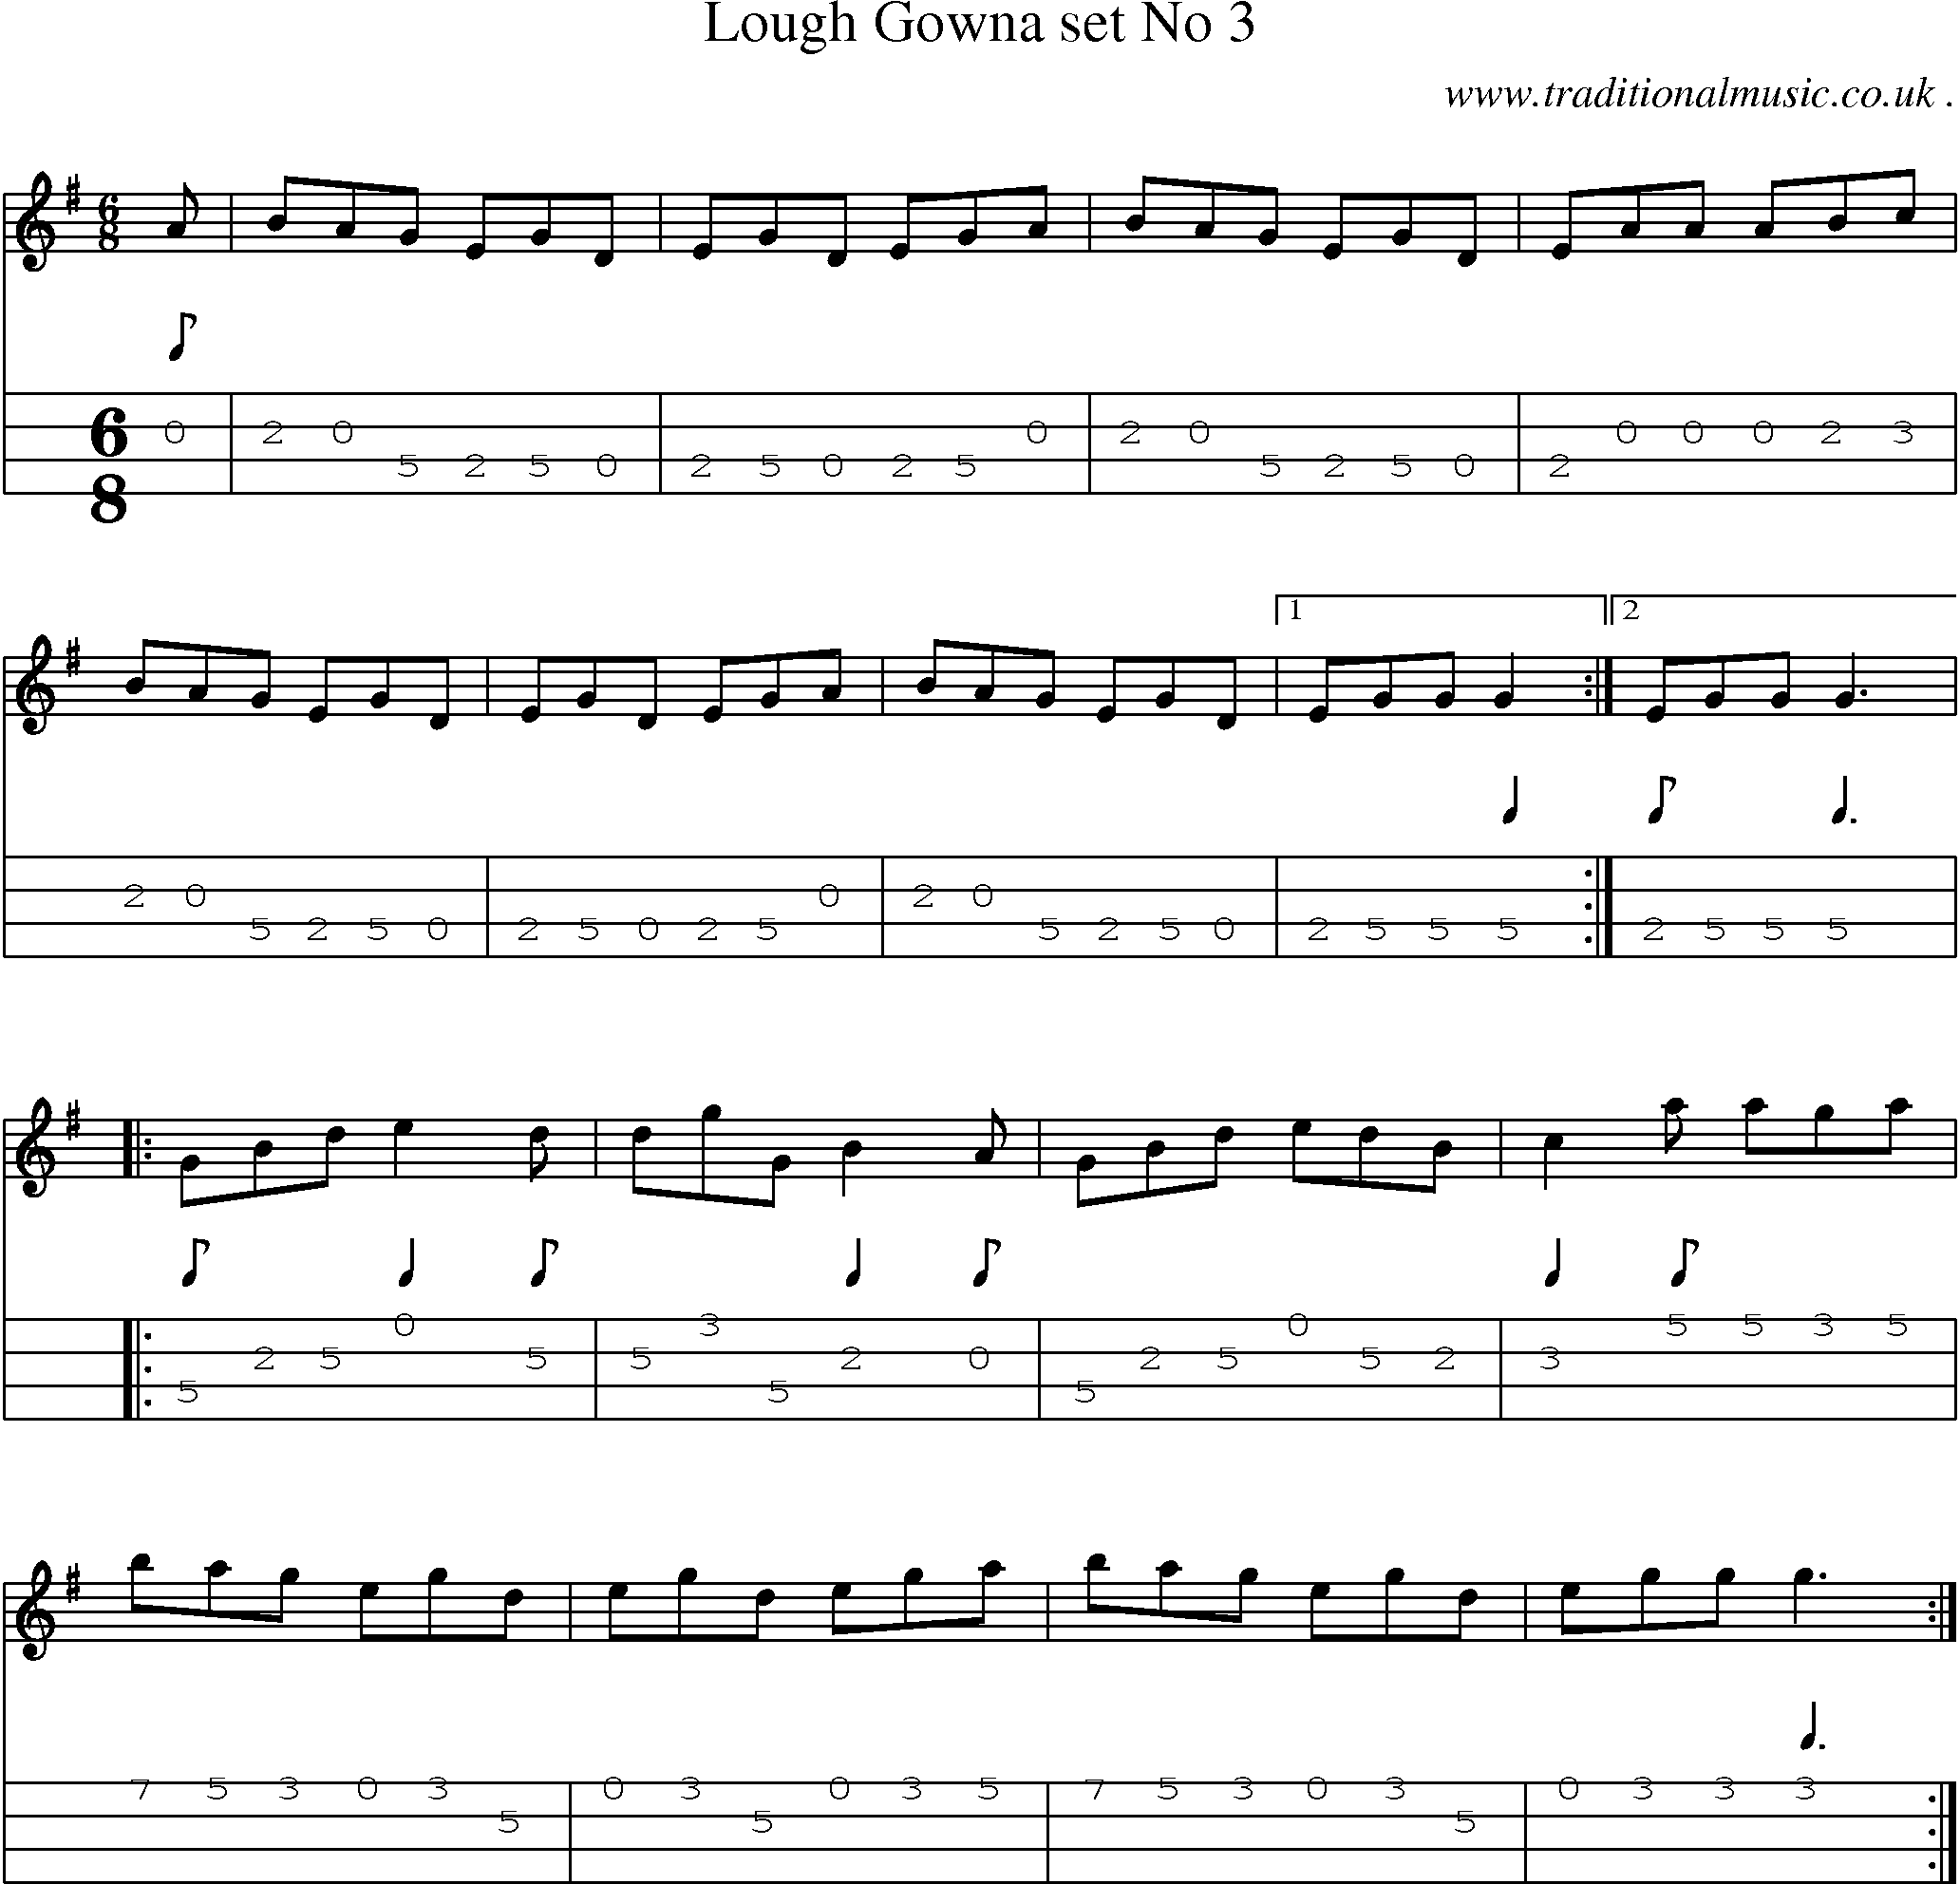 Sheet-Music and Mandolin Tabs for Lough Gowna Set No 3